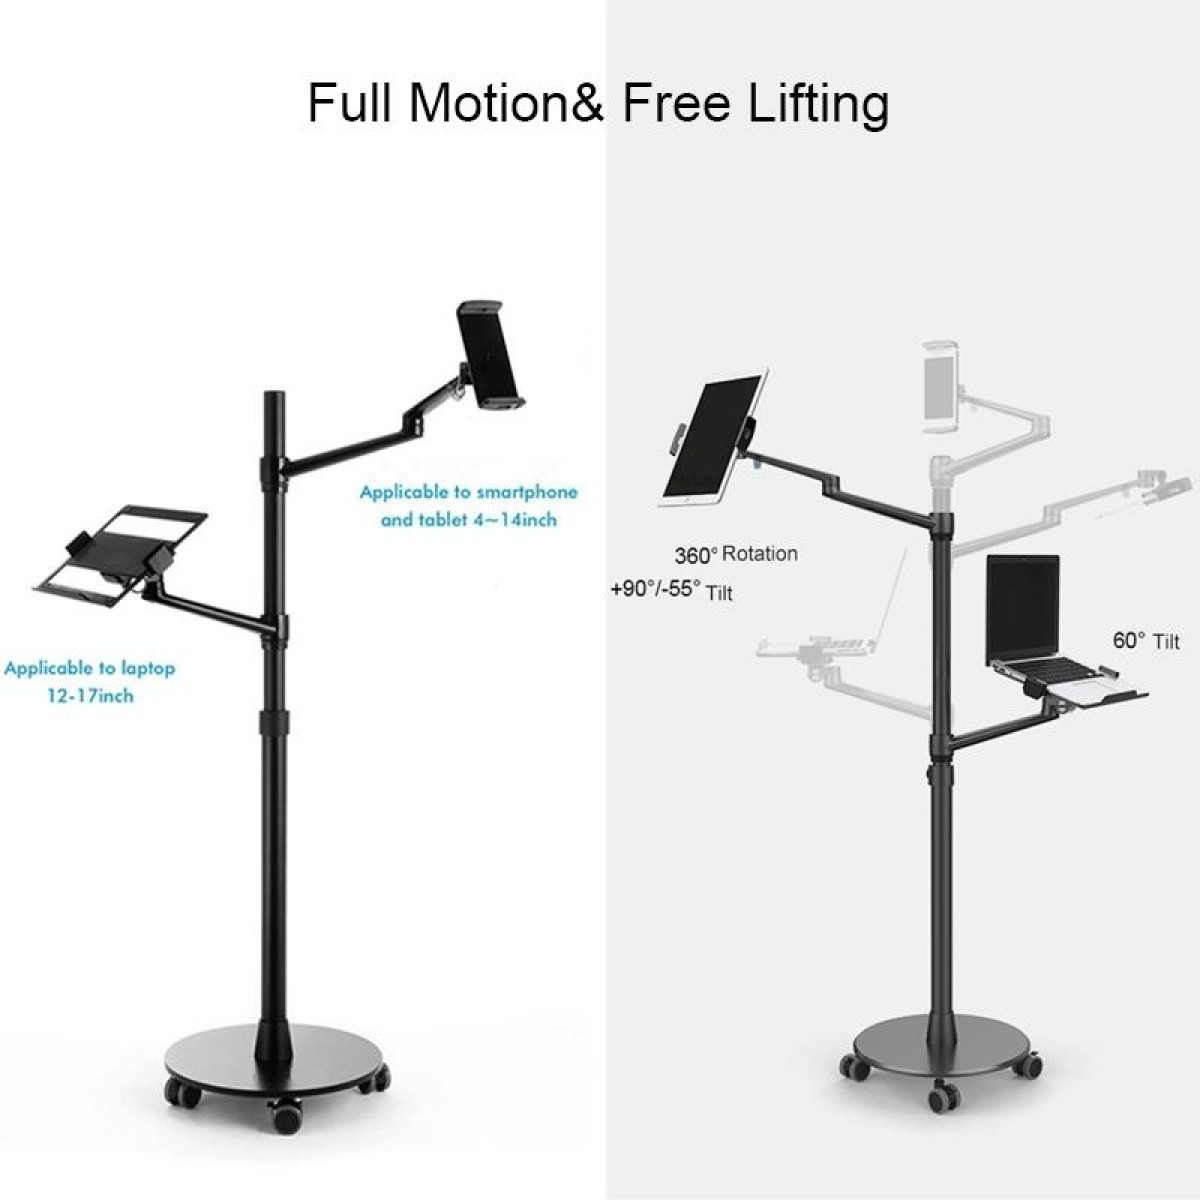 UP-9L Multifunction Laptop Floor Stand